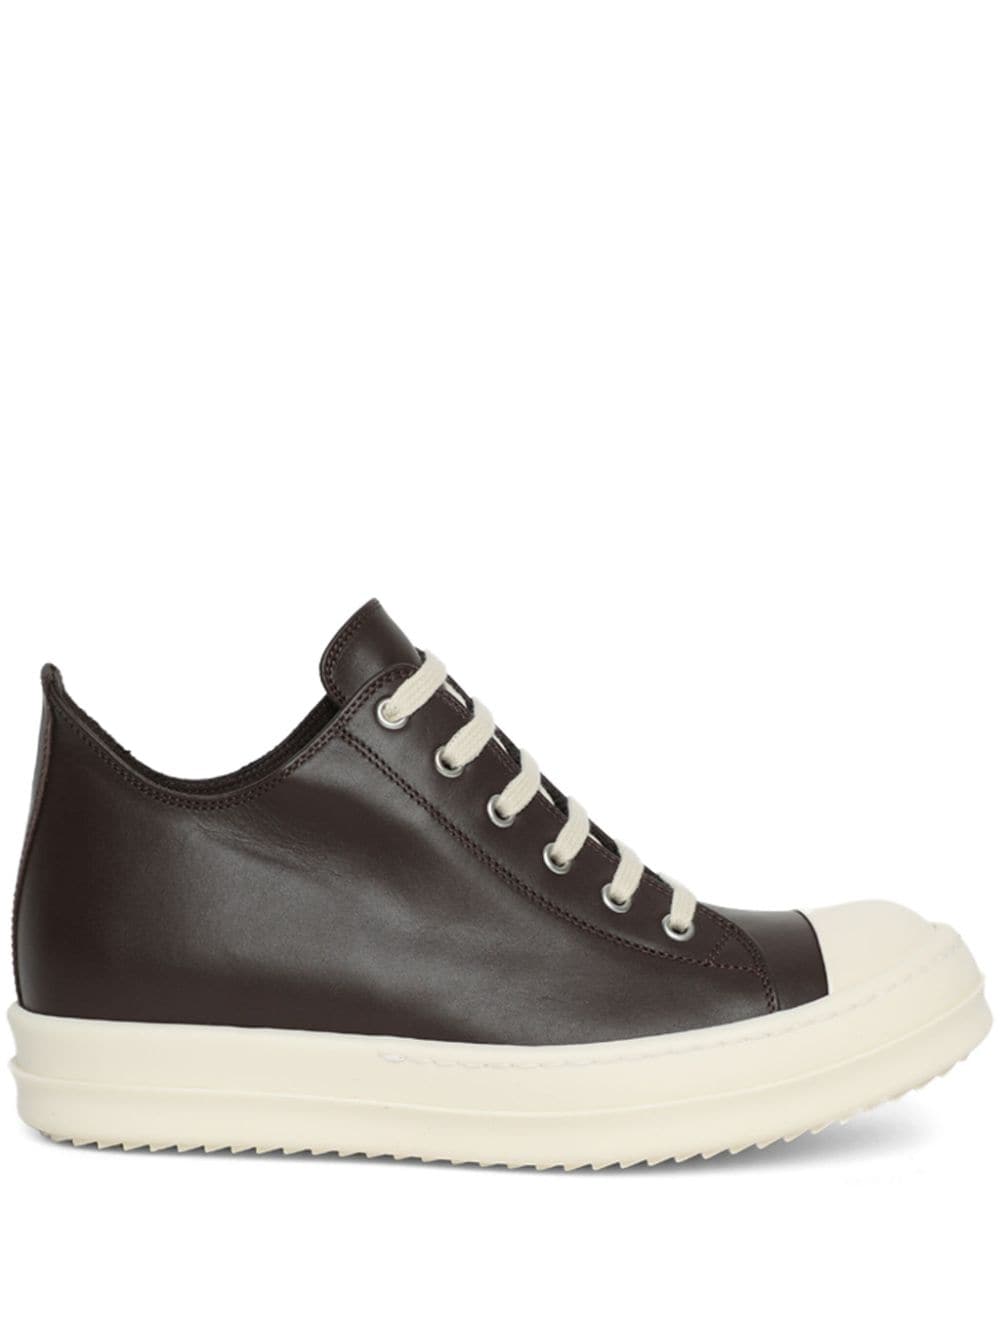 RICK OWENS LACE-UP LEATHER SNEAKERS